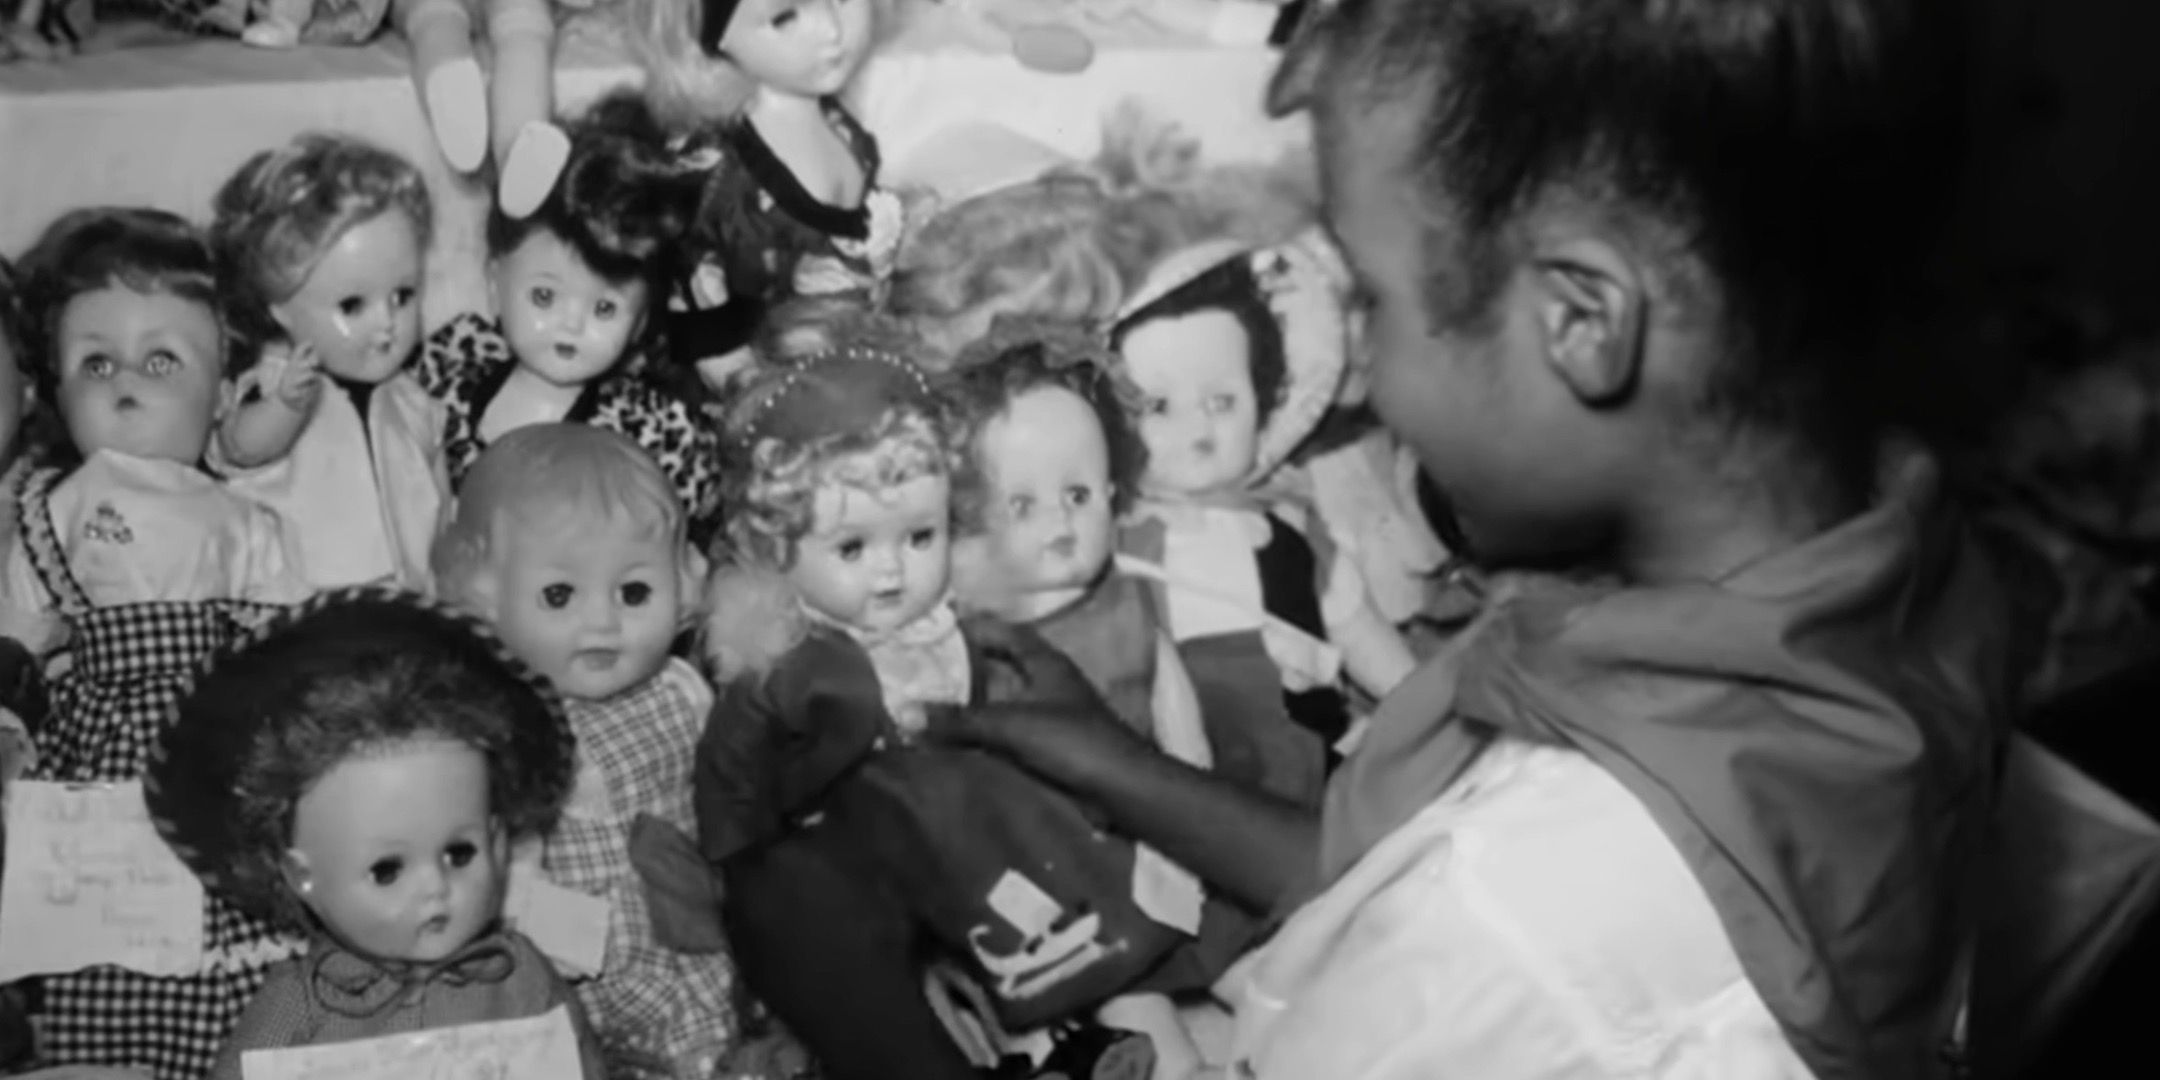 An old video shows a young girl picking up a baby doll. 